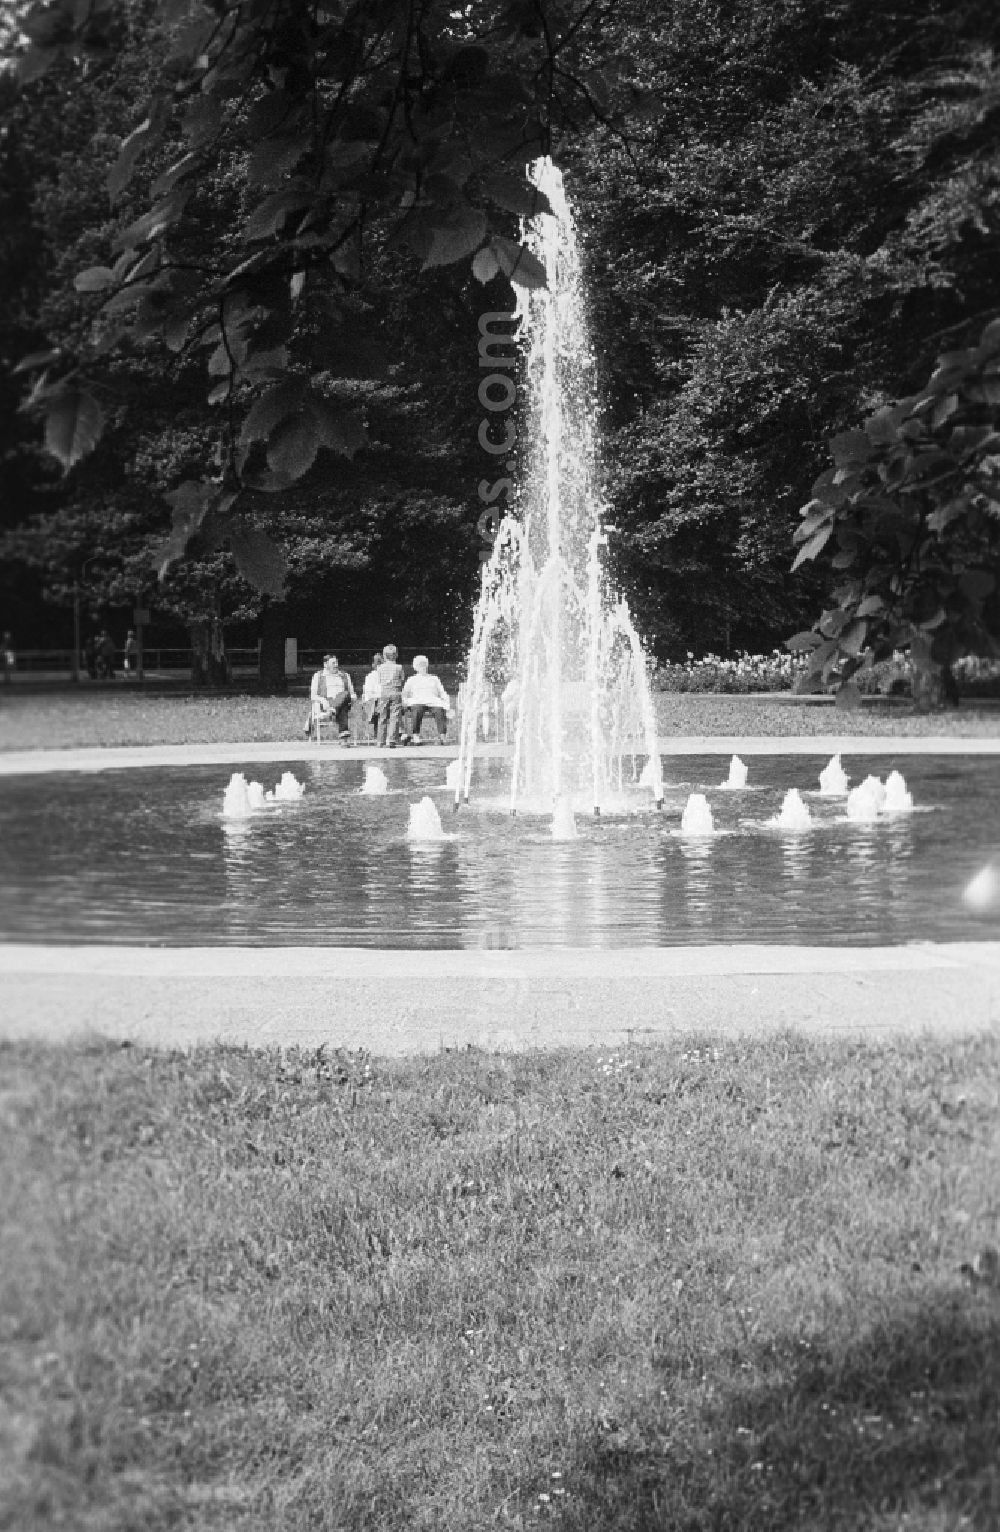 GDR picture archive: Berlin - Fountains in the rose garden in the Treptower park in Berlin, the former capital of the GDR, German democratic republic